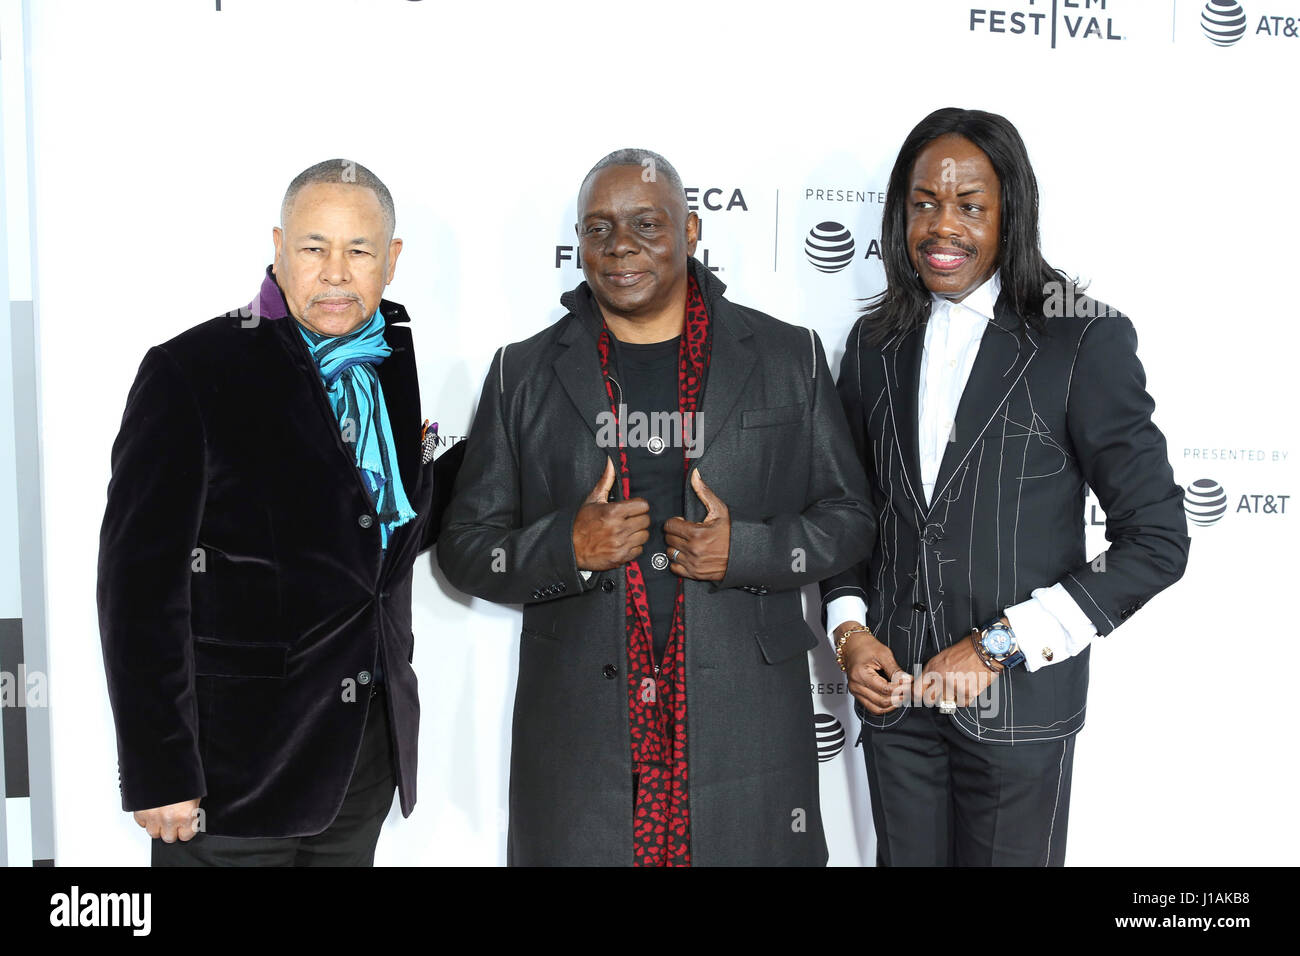 New York, USA. 19. April 2017. Earth Wind And Fire kommt bei der 2017 Tribeca Film Festival Opening Night, Clive Davis: The Soundtrack Of Our lebt Credit: The Foto Zugang/Alamy Live News Stockfoto